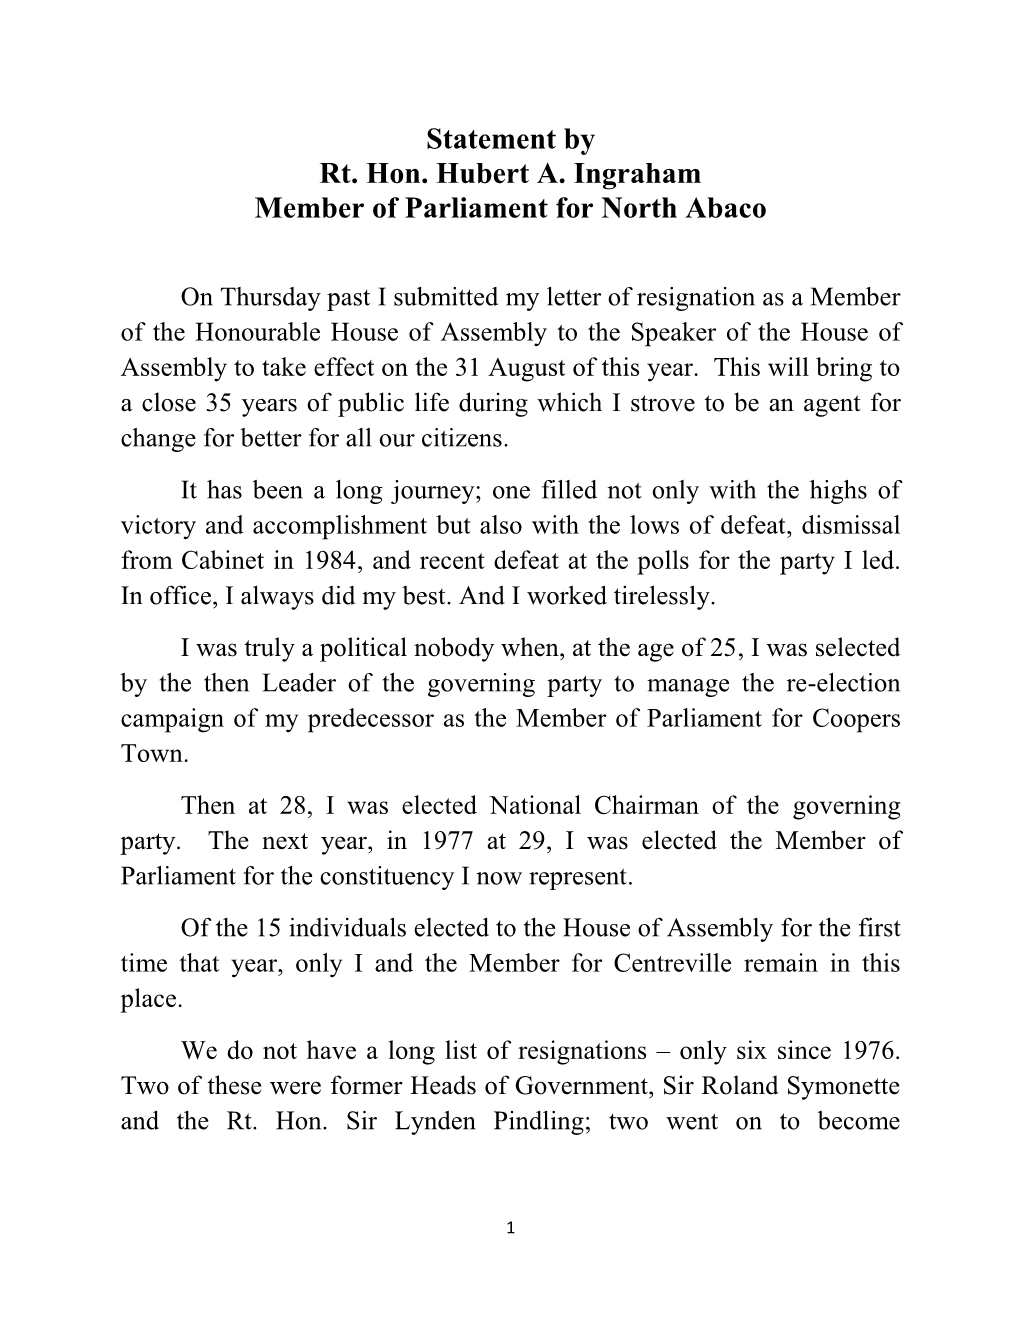 Statement by Rt. Hon. Hubert A. Ingraham Member of Parliament for North Abaco